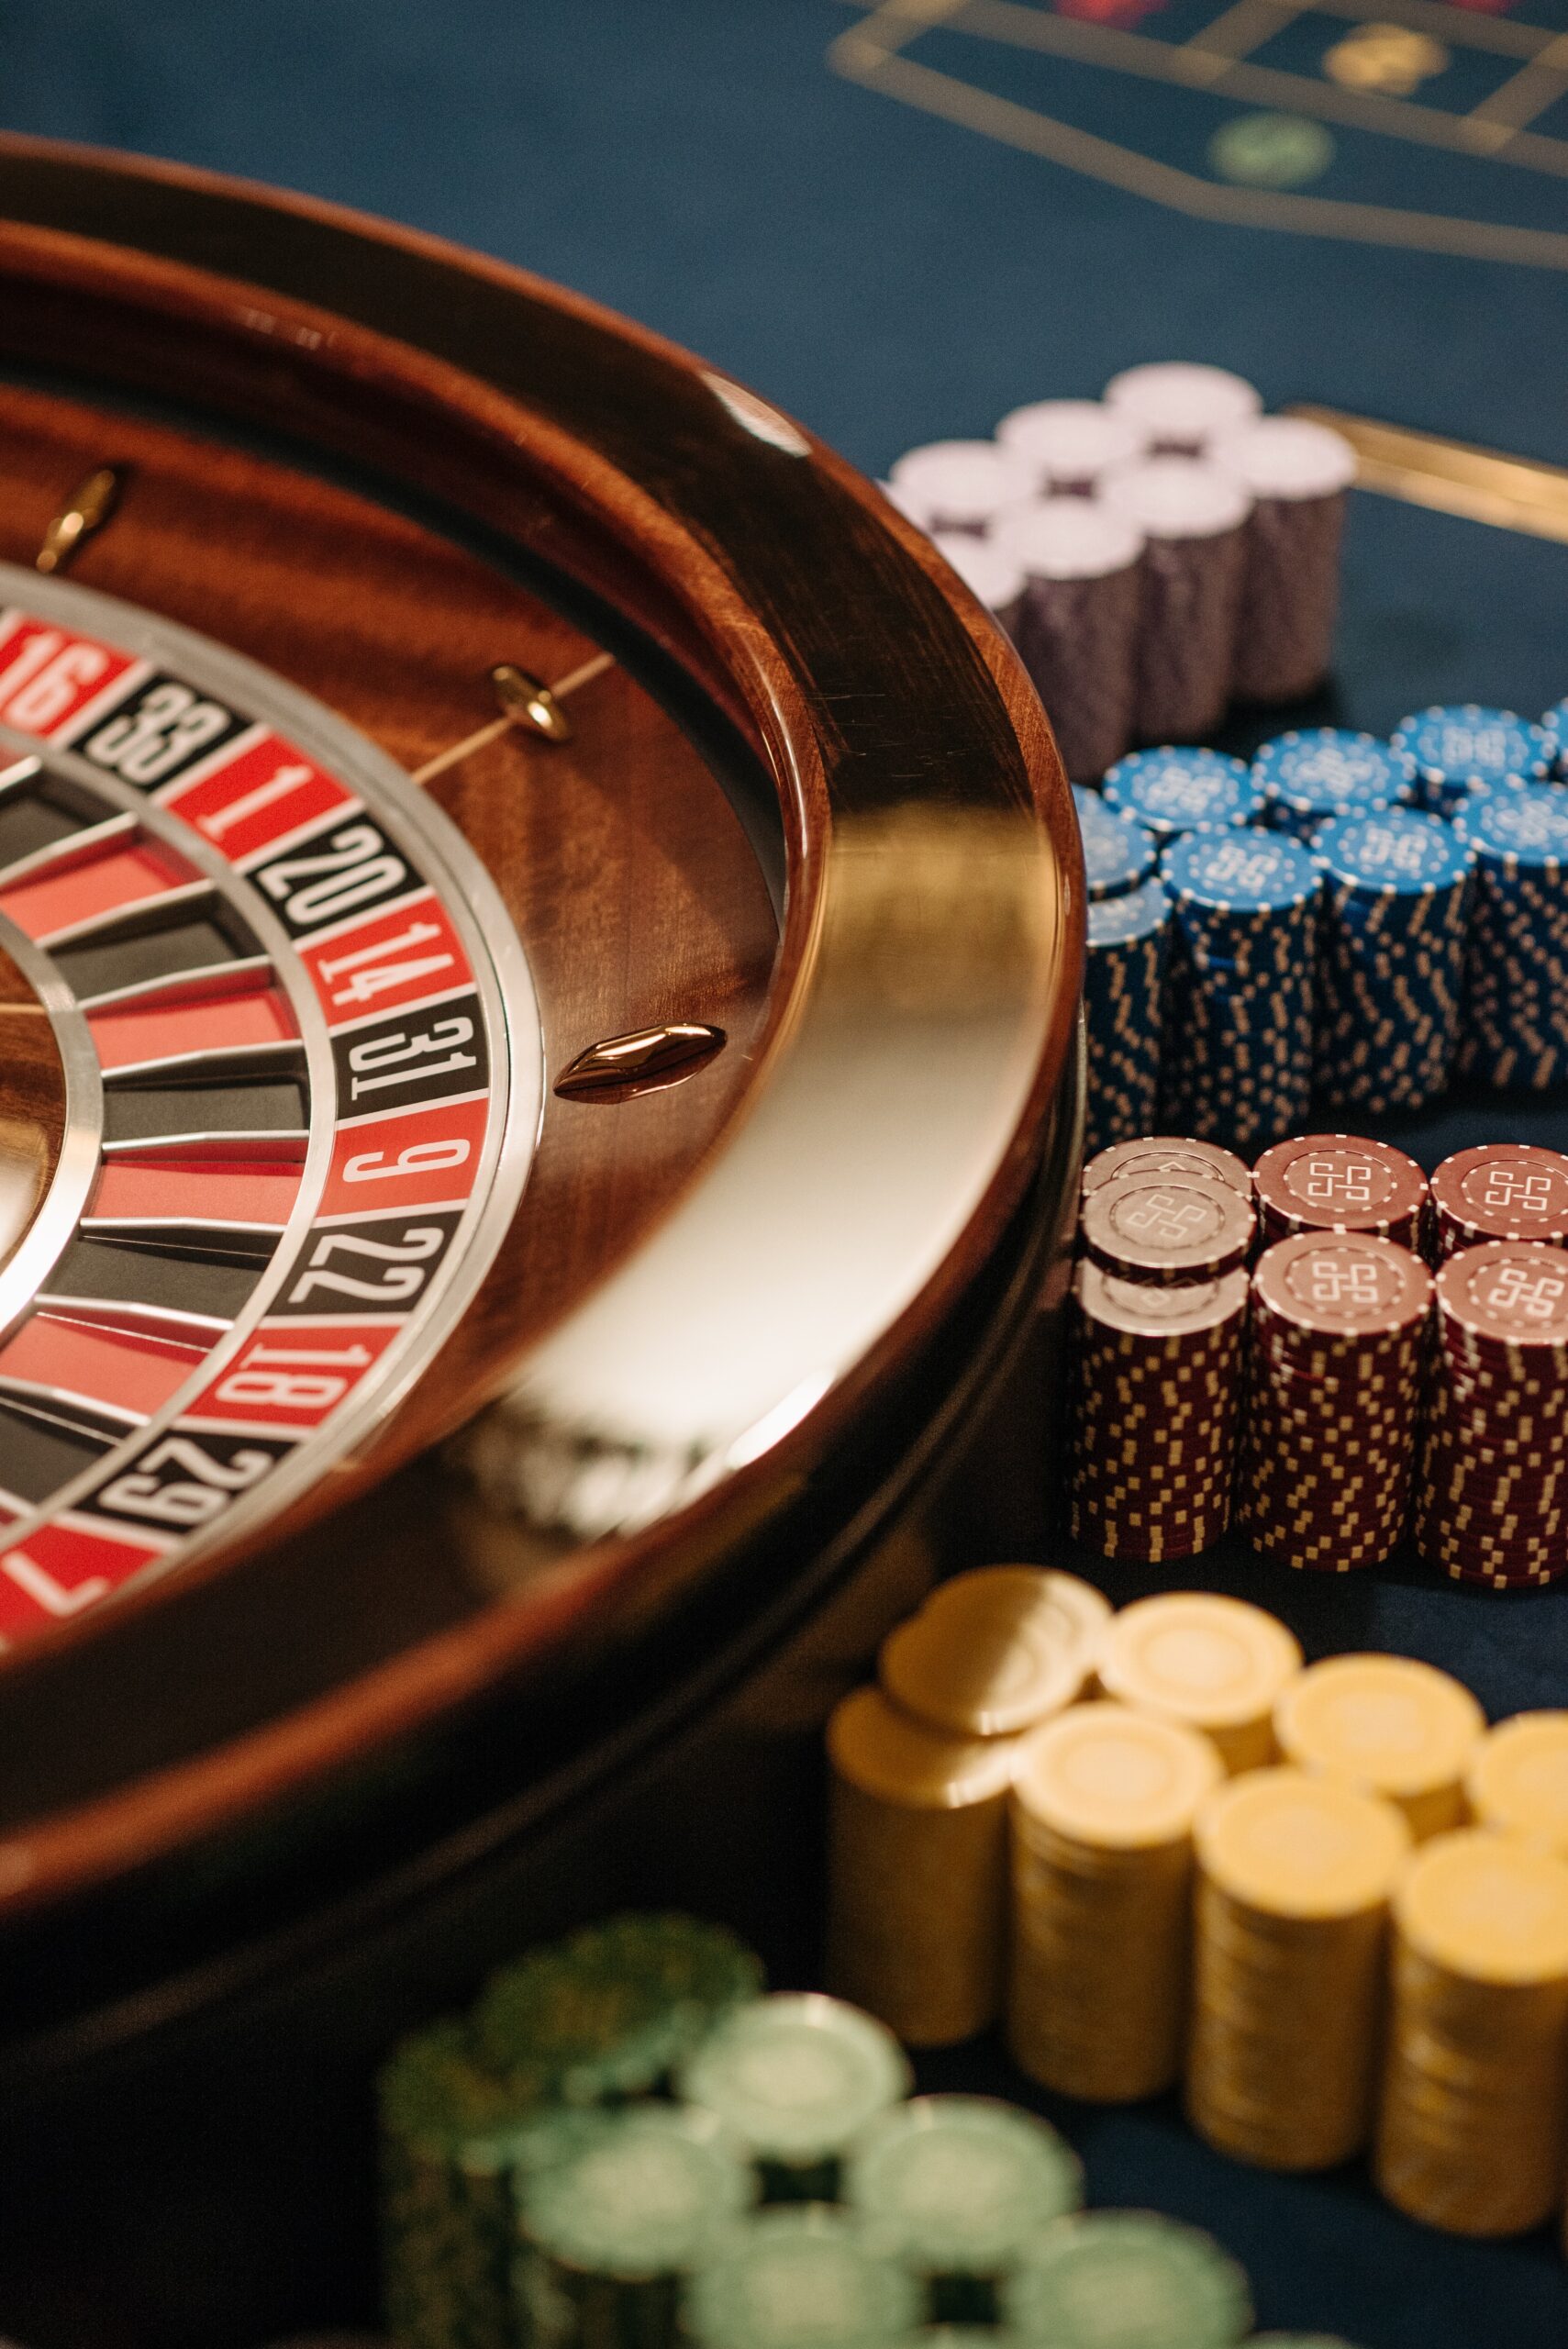 With online casino apps, you can have the ultimate gambling experience